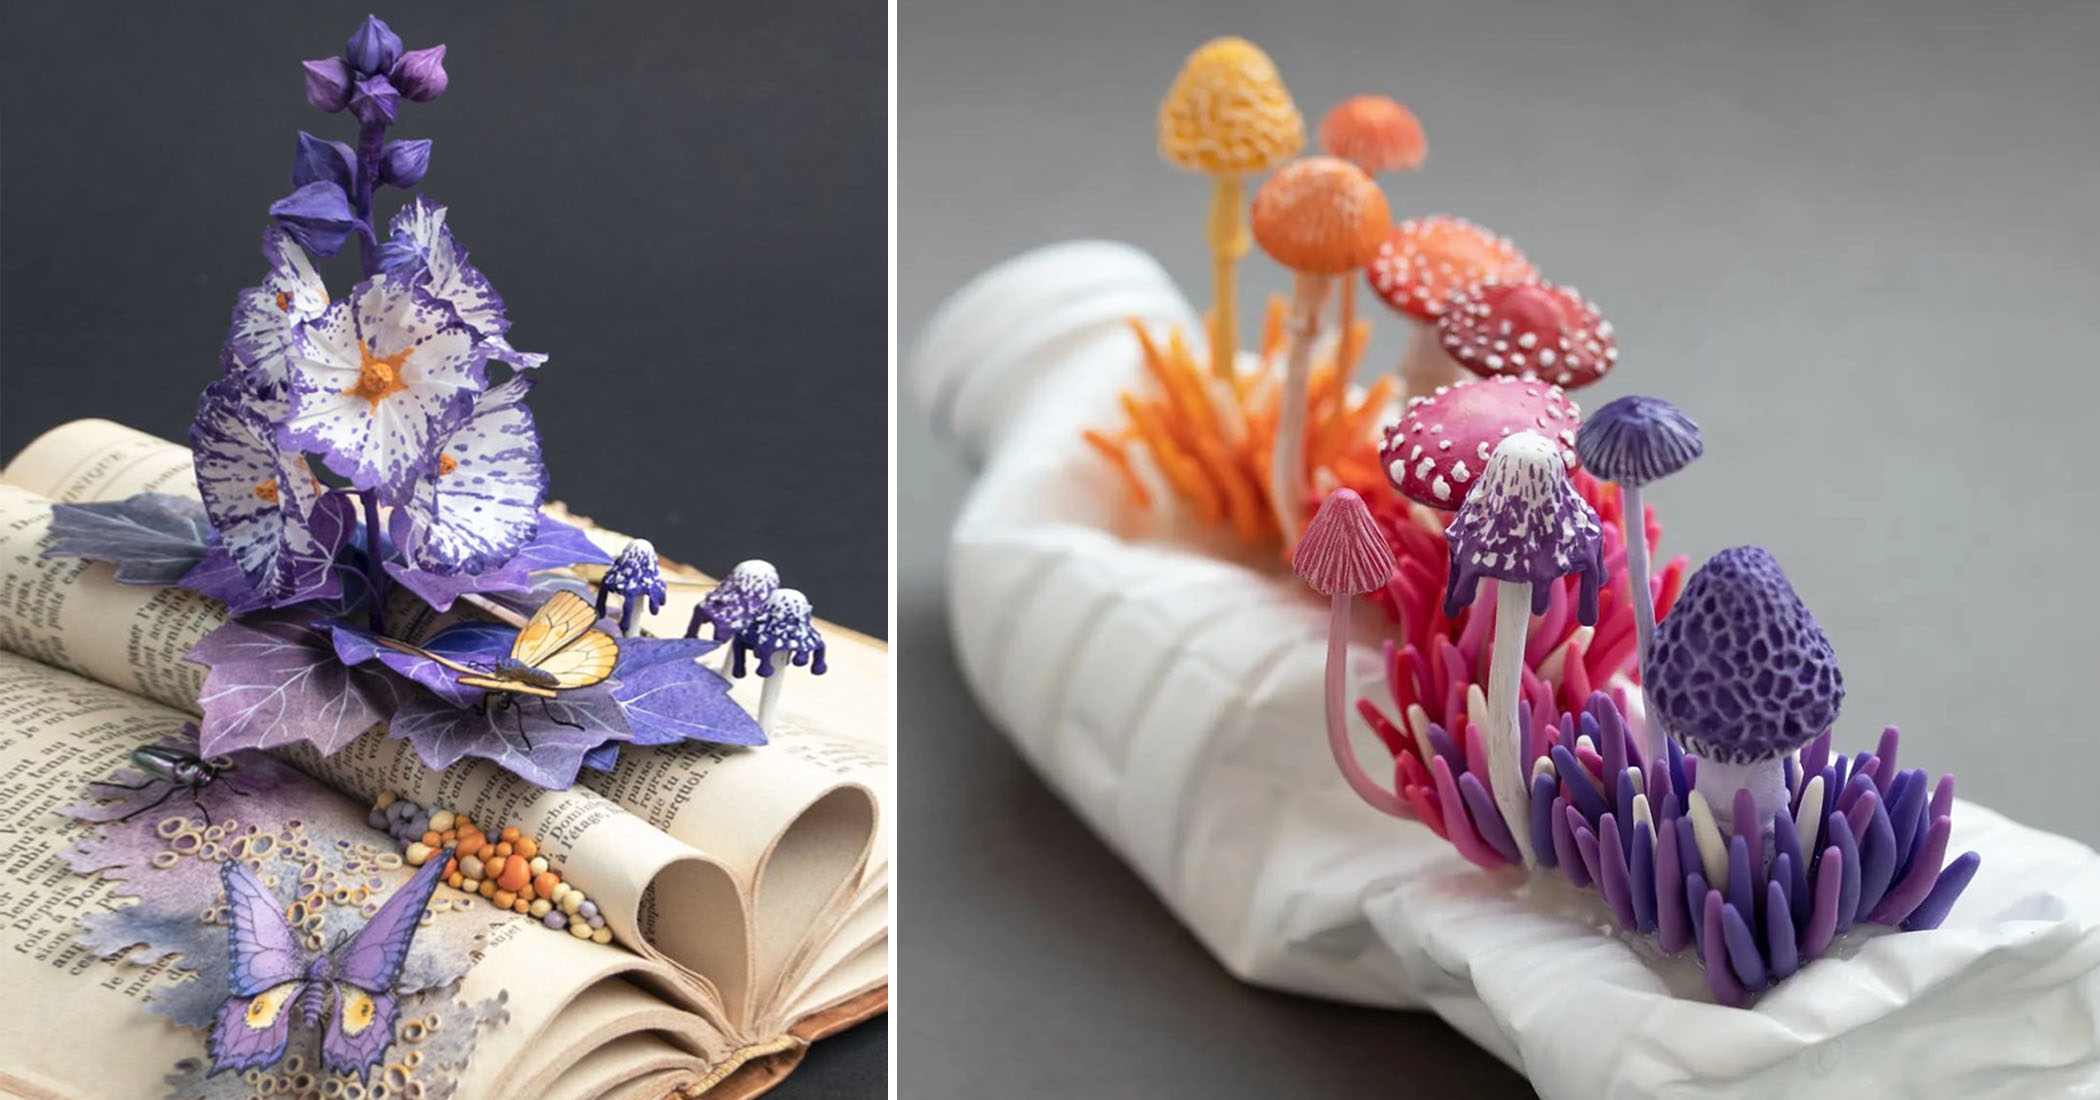 Artist ‘Grows’ Corals, Flowers, and Fungi on Discarded Objects Turning Them Into Artworks